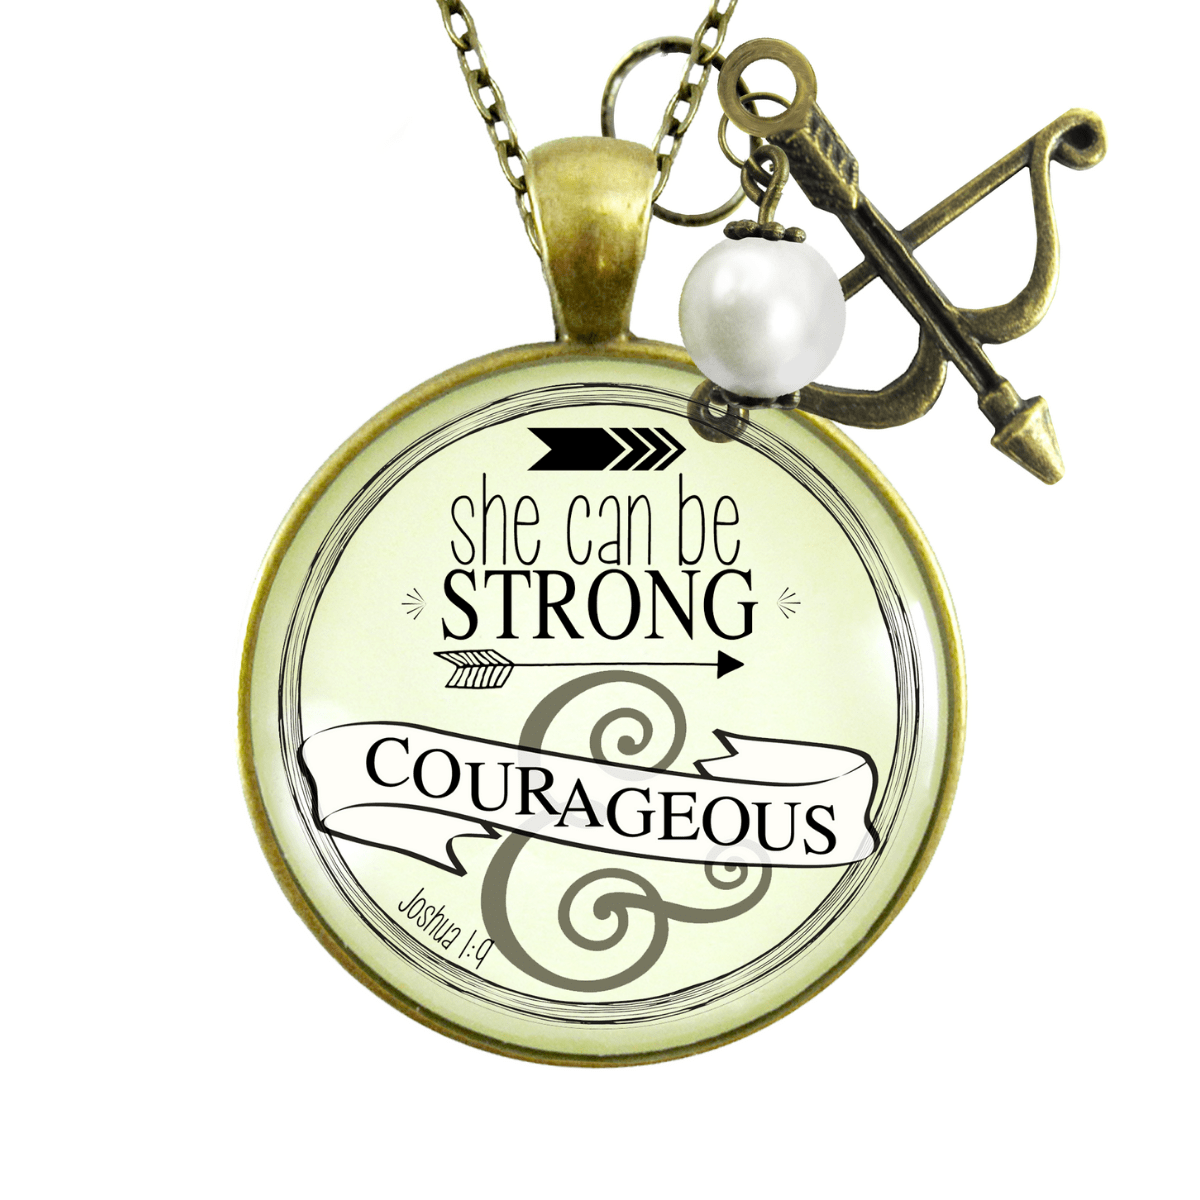 Gutsy Goodness She Can Be Strong Courageous Necklace Brave Life Quote Bow Arrow - Gutsy Goodness Handmade Jewelry;She Can Be Strong And Courageous - Gutsy Goodness Handmade Jewelry Gifts